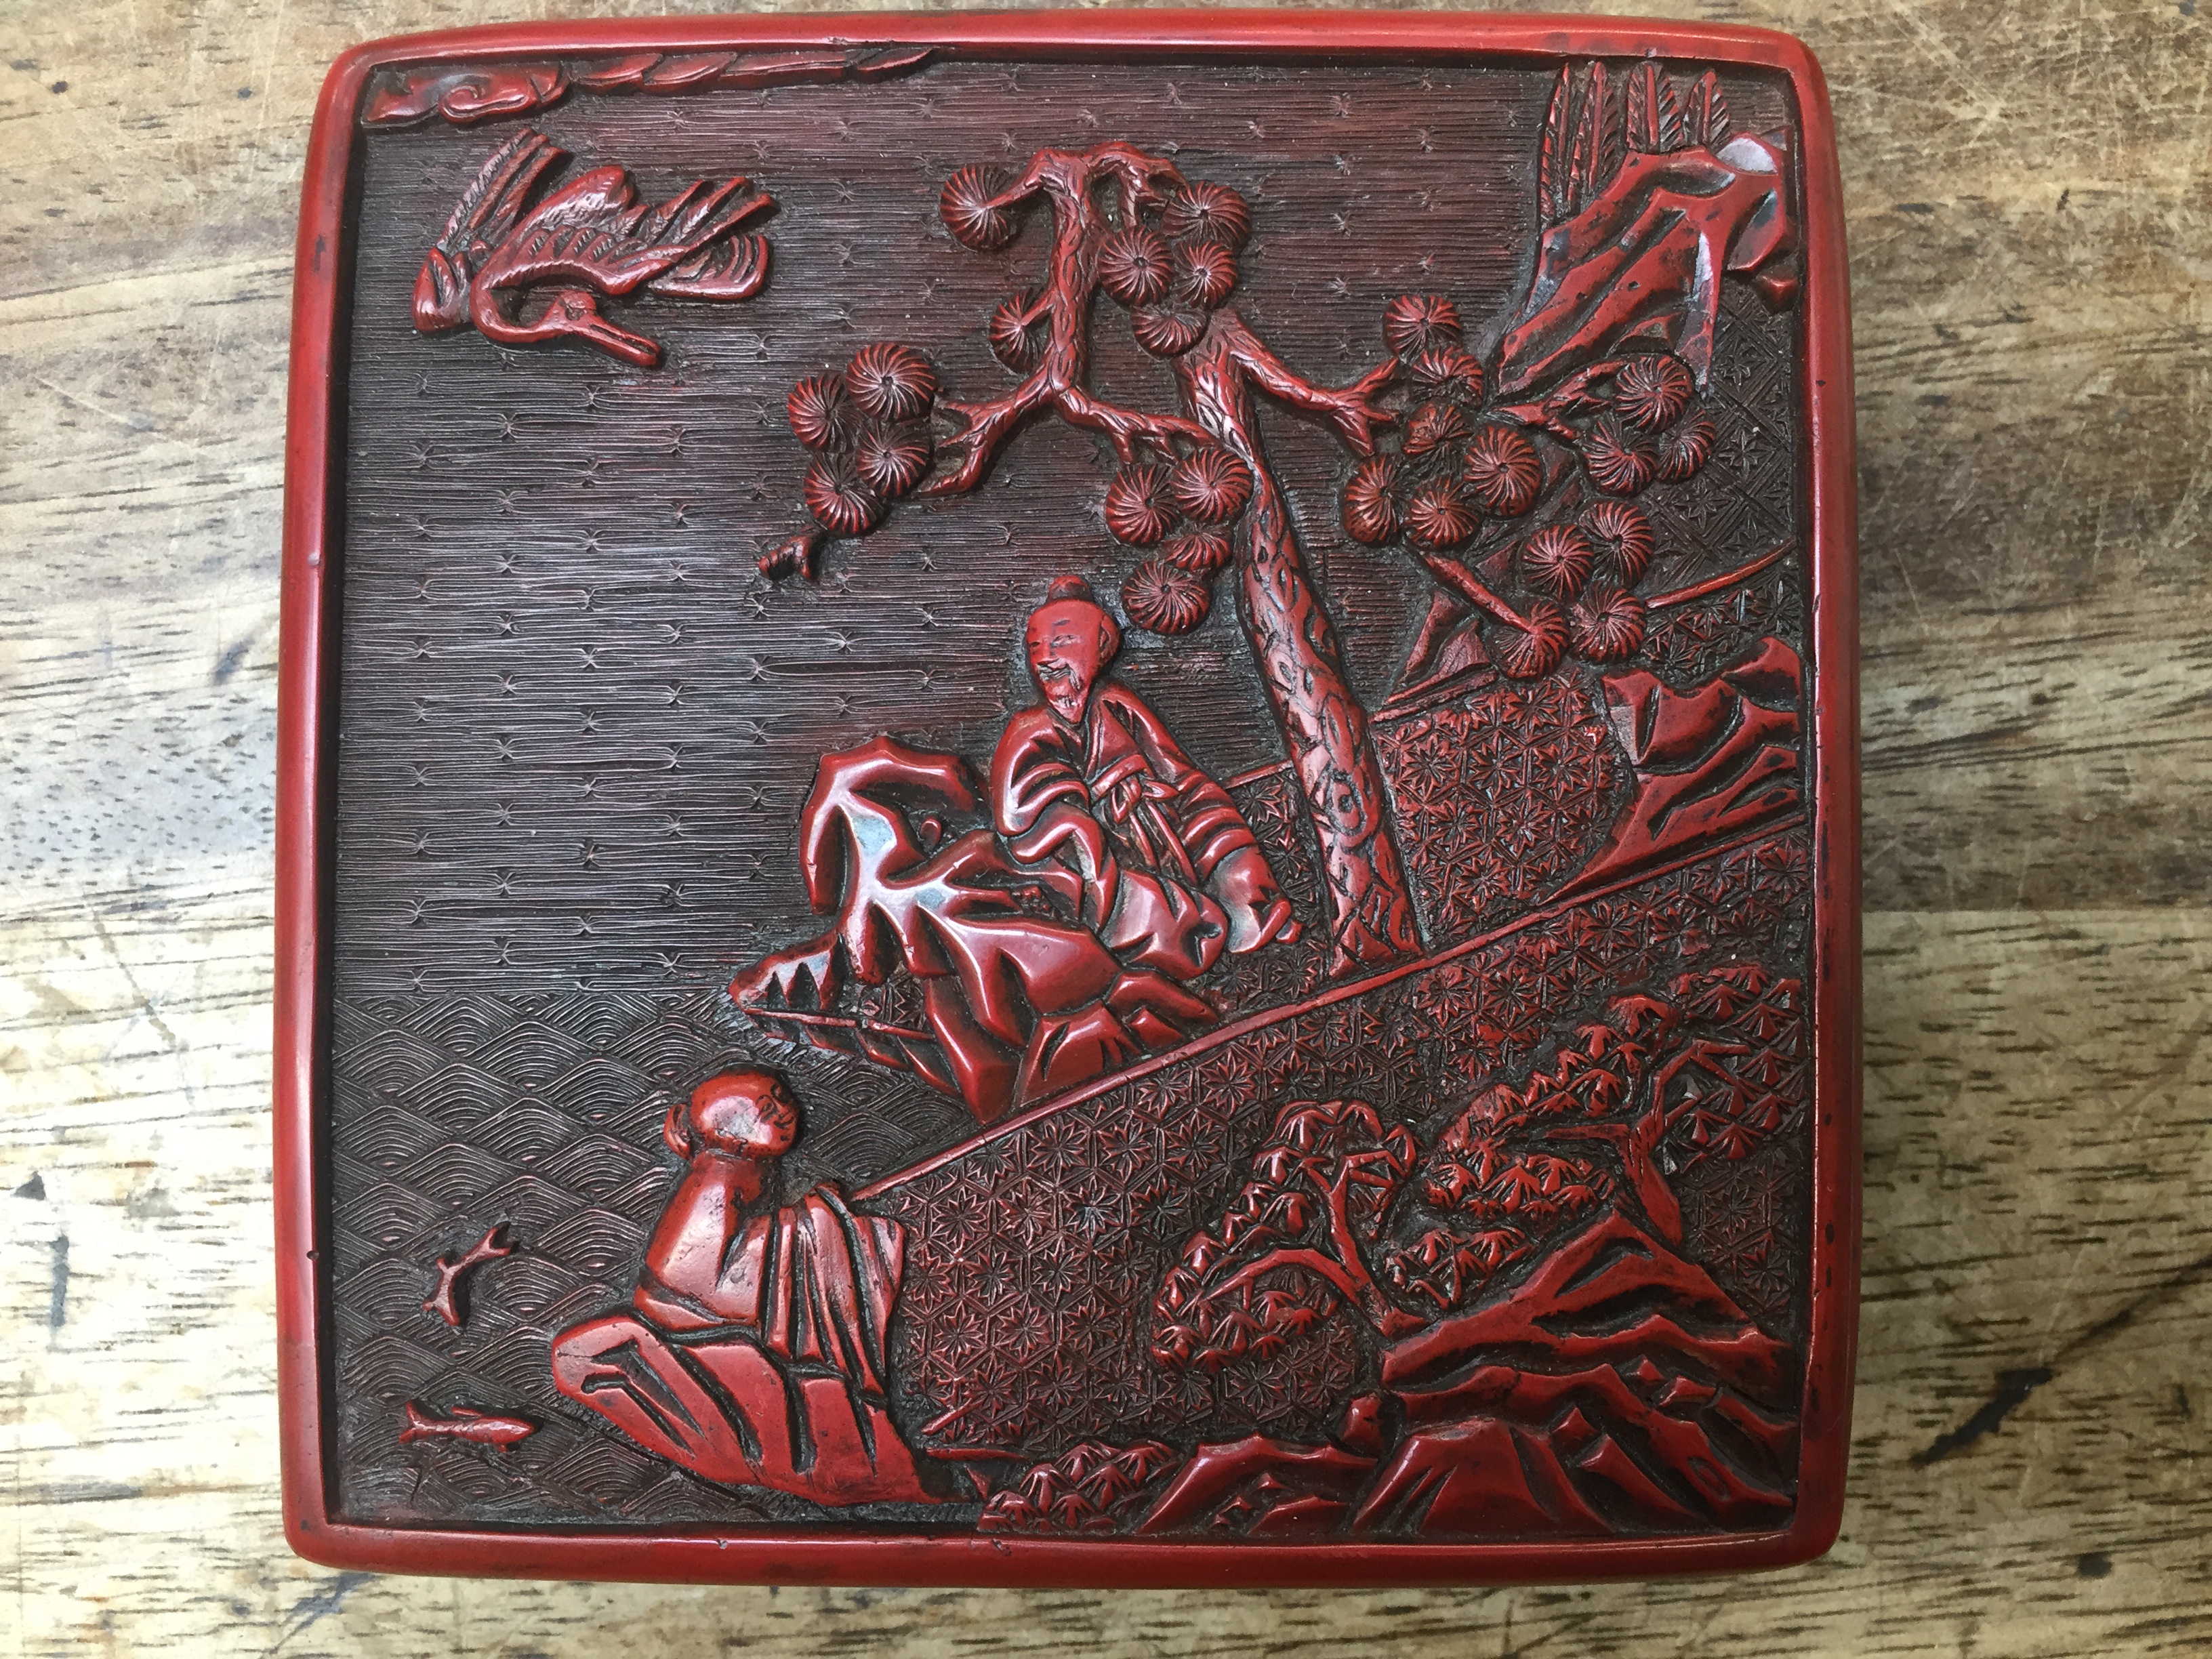 A CHINESE CINNABAR LACQUER TIERED BOX AND COVER 明 剔紅士大夫圖紋四層蓋盒 - Image 4 of 39